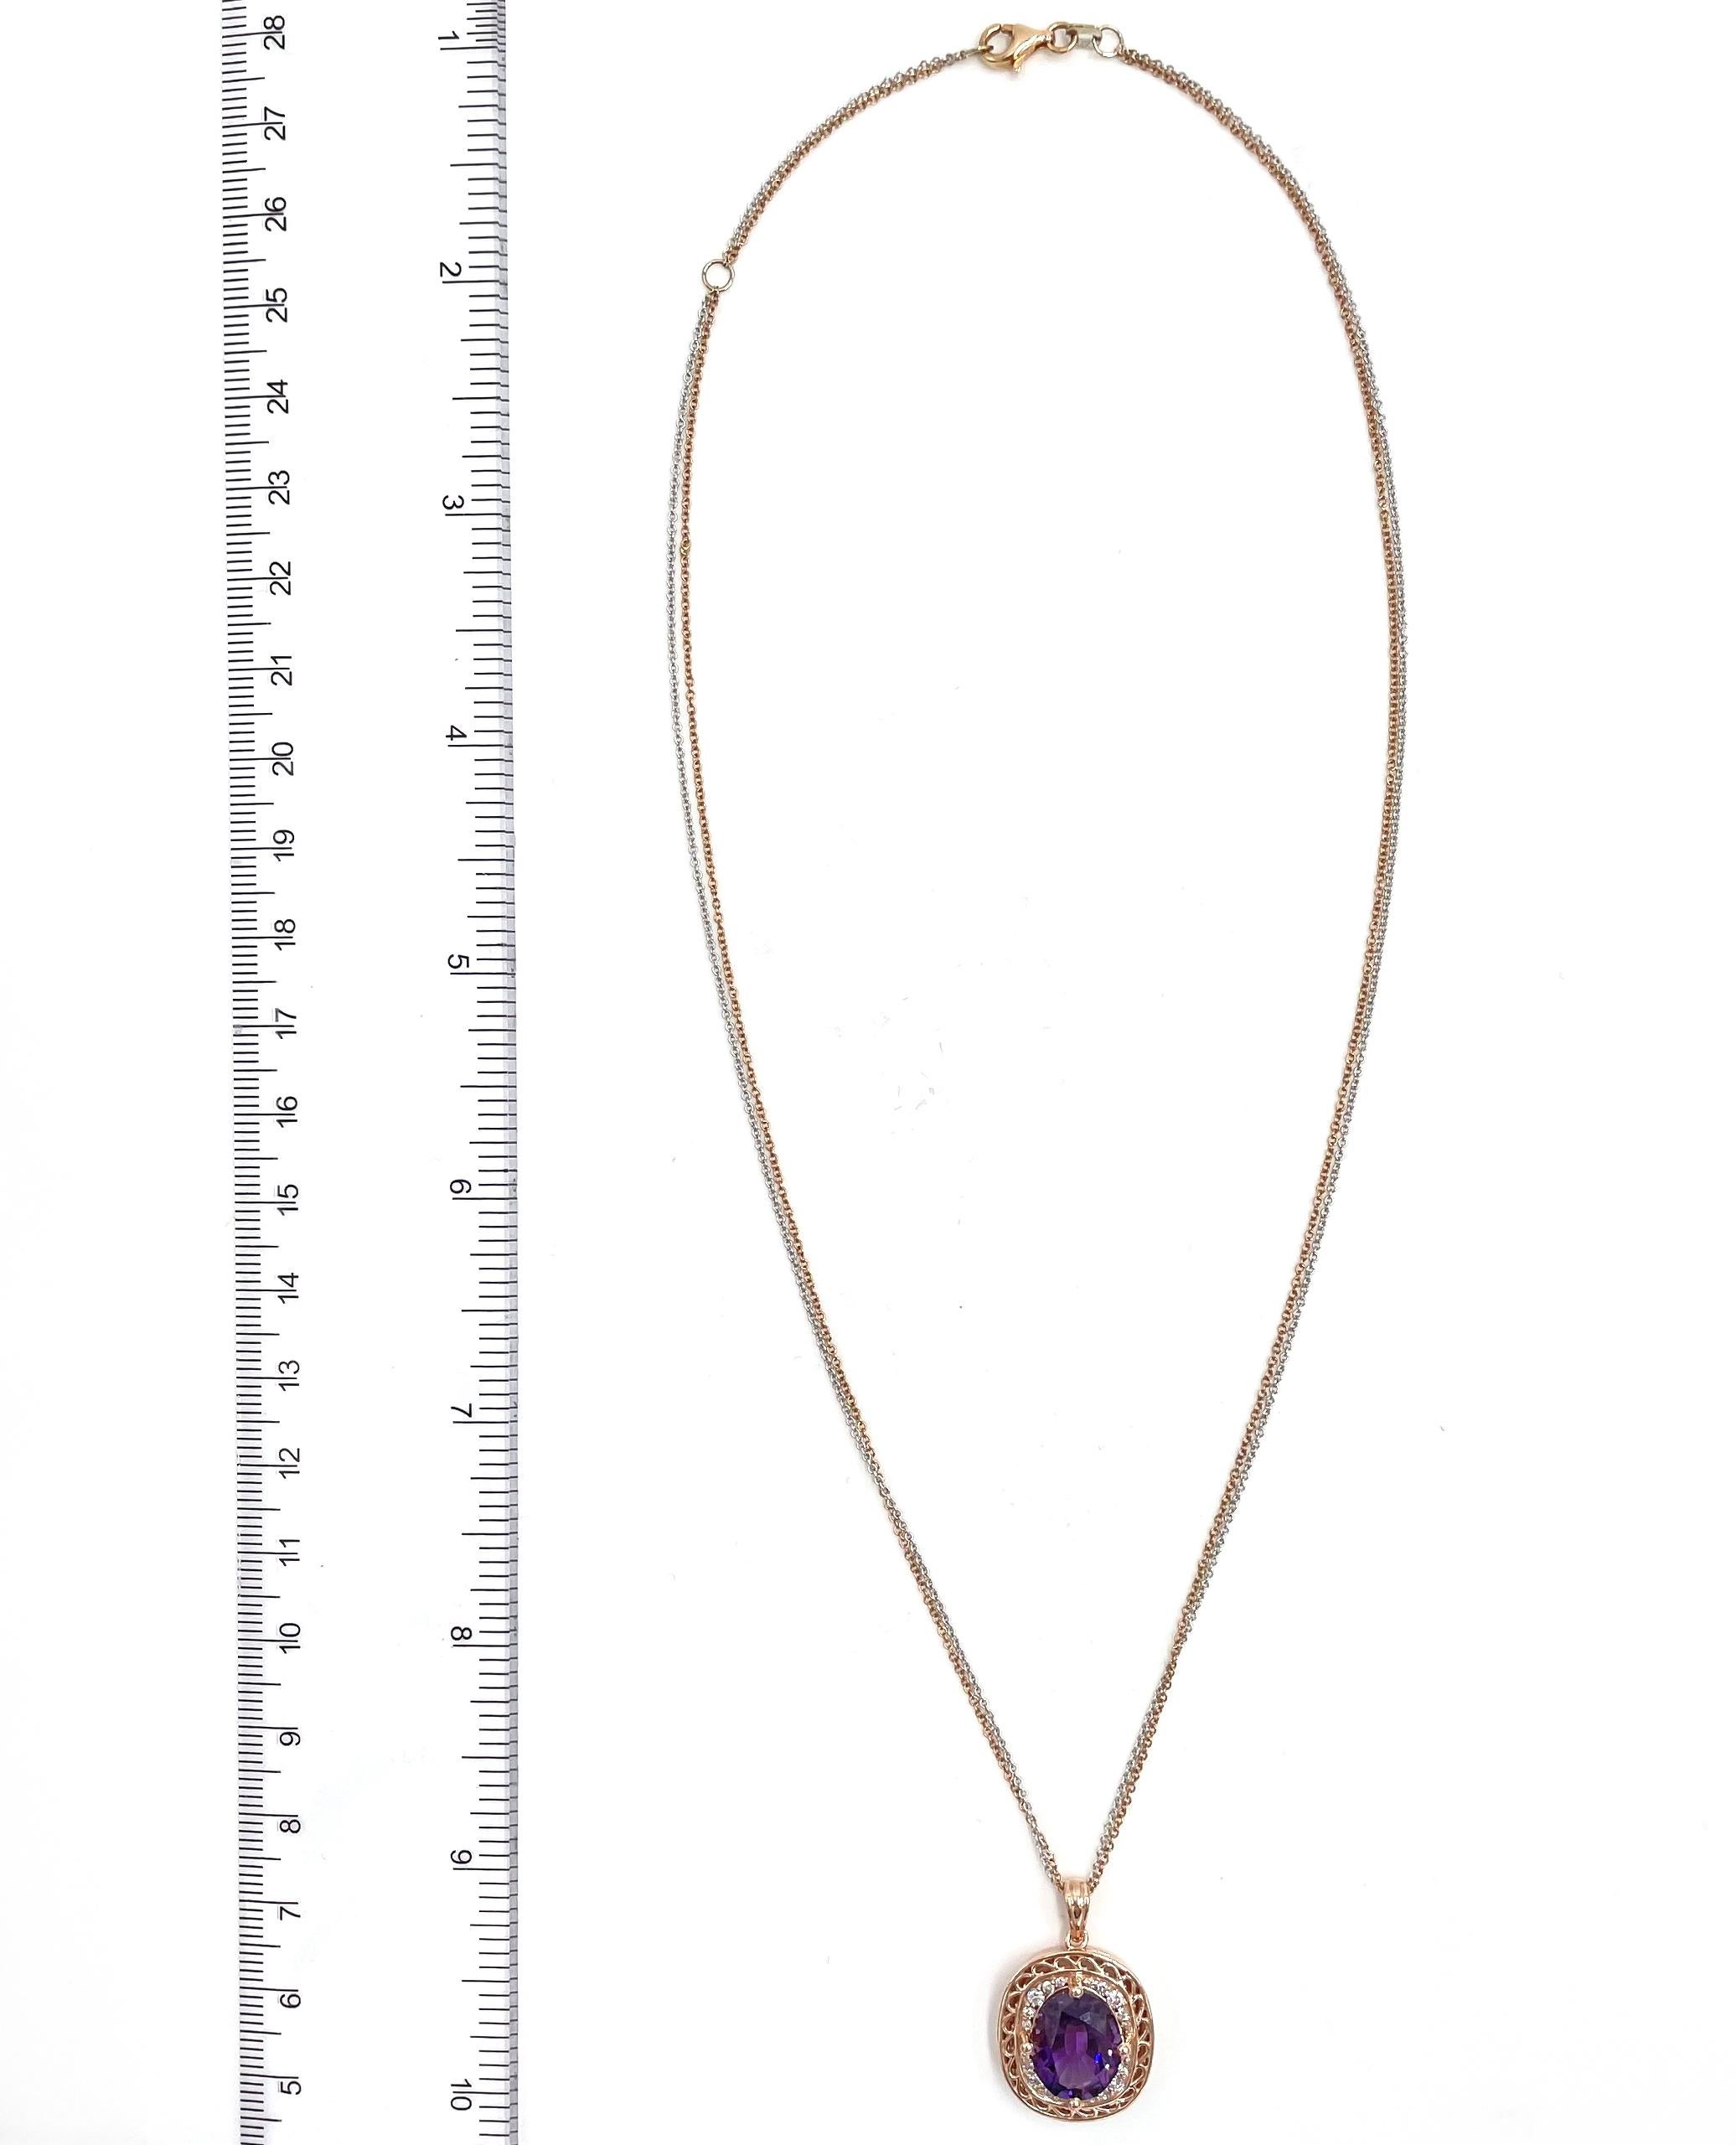 14K rose gold rectangular cushion shaped pendant with 20 round brilliant-cut diamonds 0.20 carats and one center oval shape amethyst 3.94 carats.  The pendant slides and a double strand 14K rose and white gold chain.

- Can be worn 18 or 16 inches